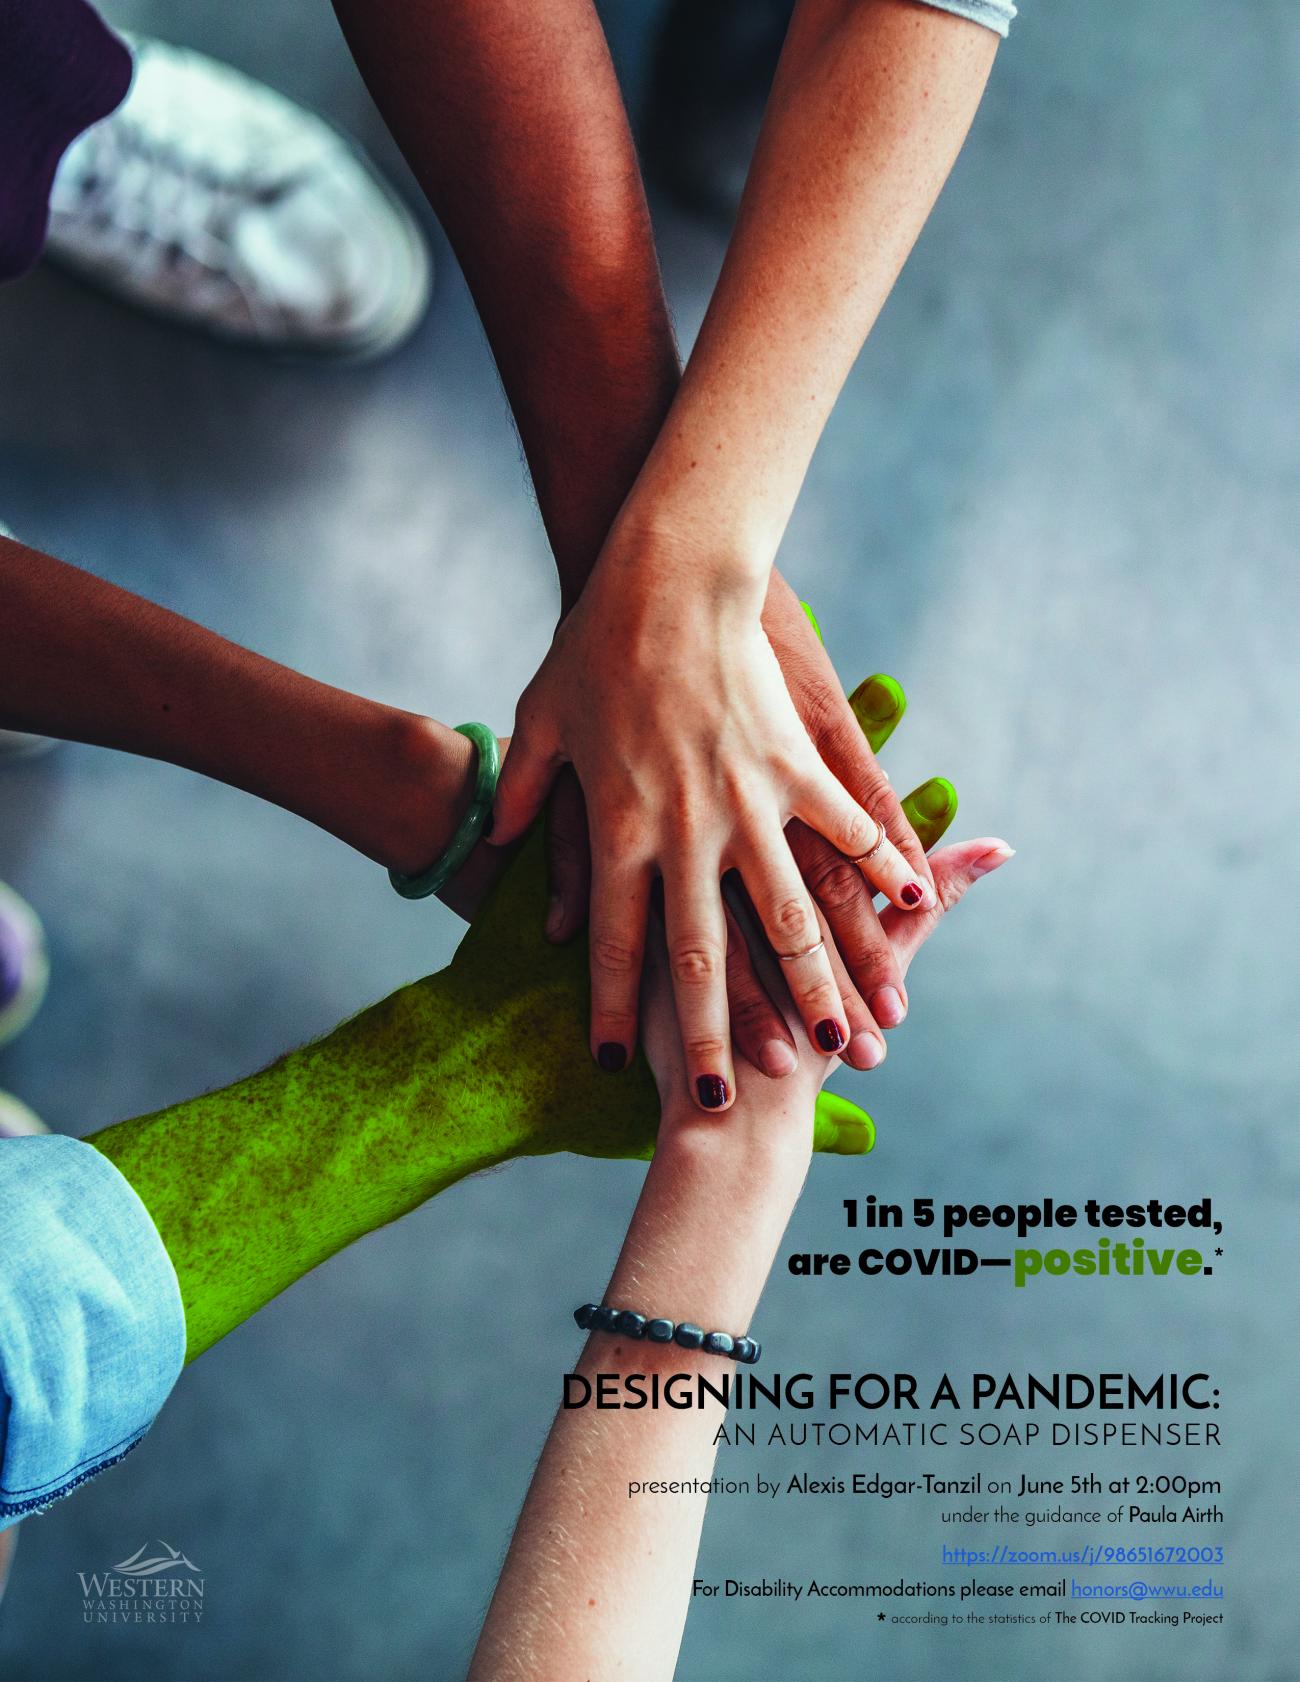 Image: Close-up of 5 friends’ hands. One is painted green. Text: “1 in 5 people tested, are COVID-positive.“  "DESIGNING FOR A PANDEMIC: AN AUTOMATIC SOAP DISPENSER"  “presentation by Alexis Edgar-Tanzil on June 5th at 2:00pm“  “under the guidance of Paula Airth”  "https://zoom.us/j/98651672003"  "For Disability Accommodations please email honors@wwu.edu."